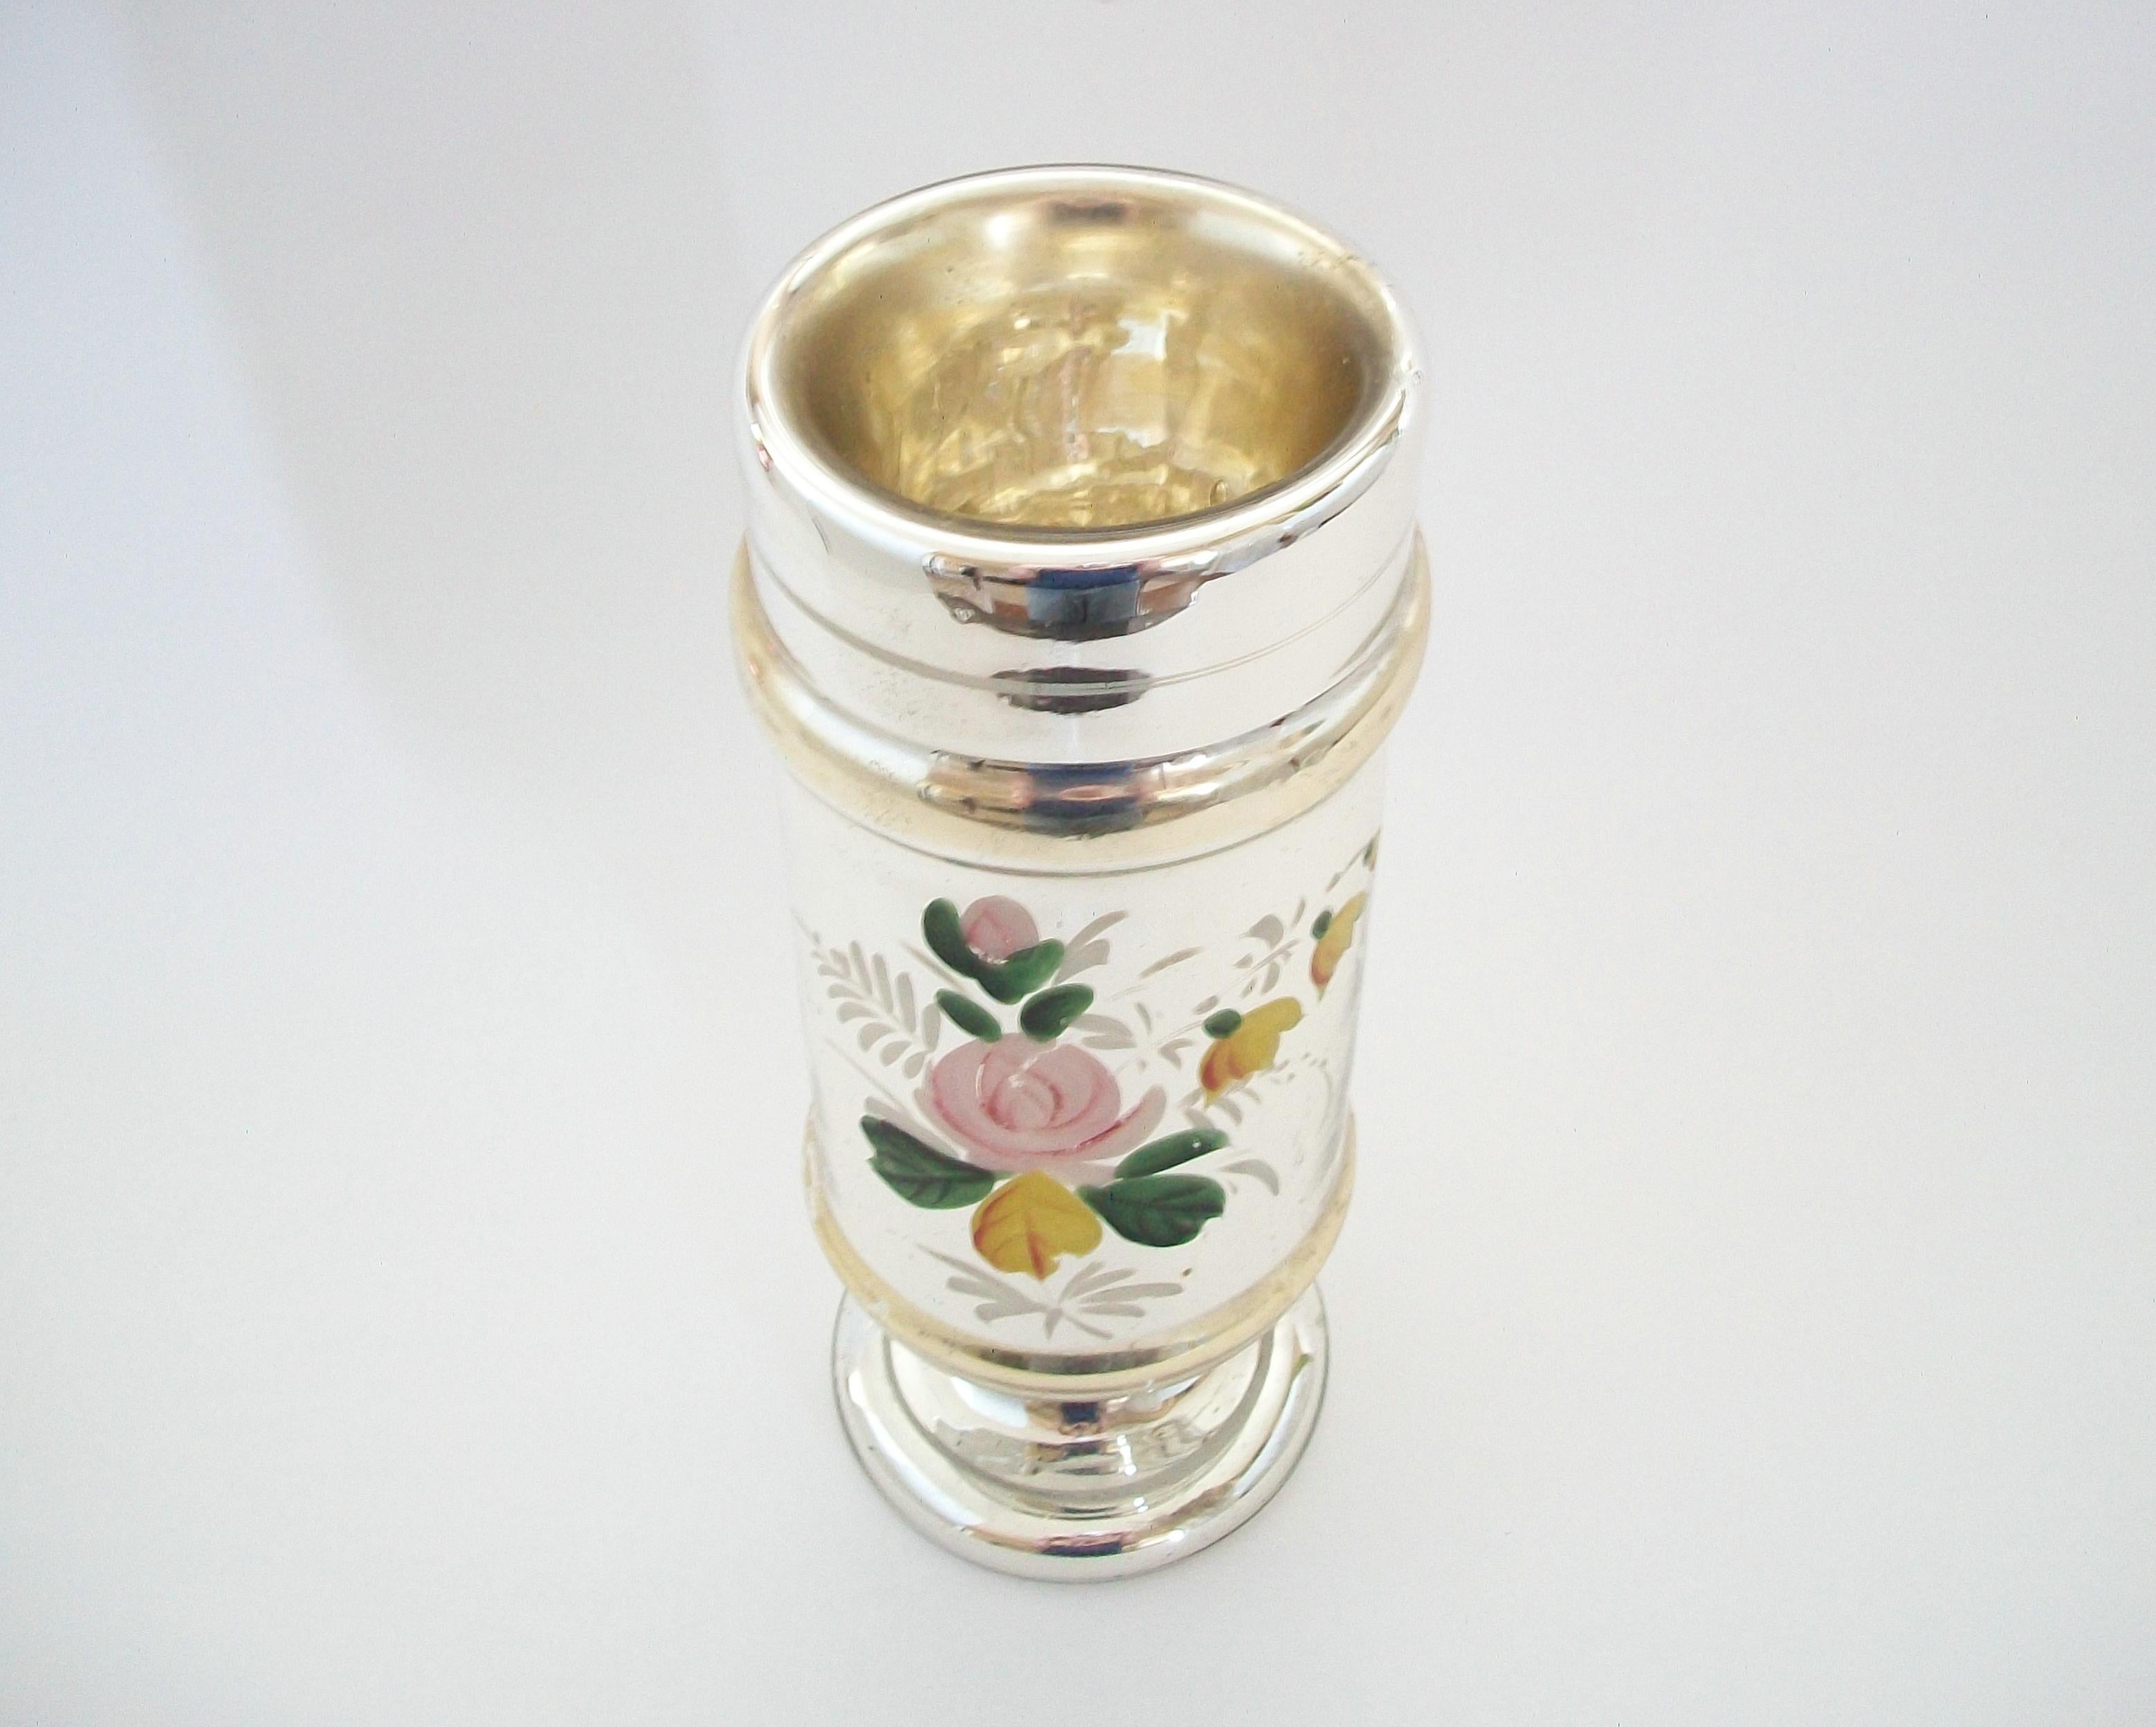 French Antique Floral Painted Gold & Silver Mercury Glass Vase - France - 19th Century For Sale